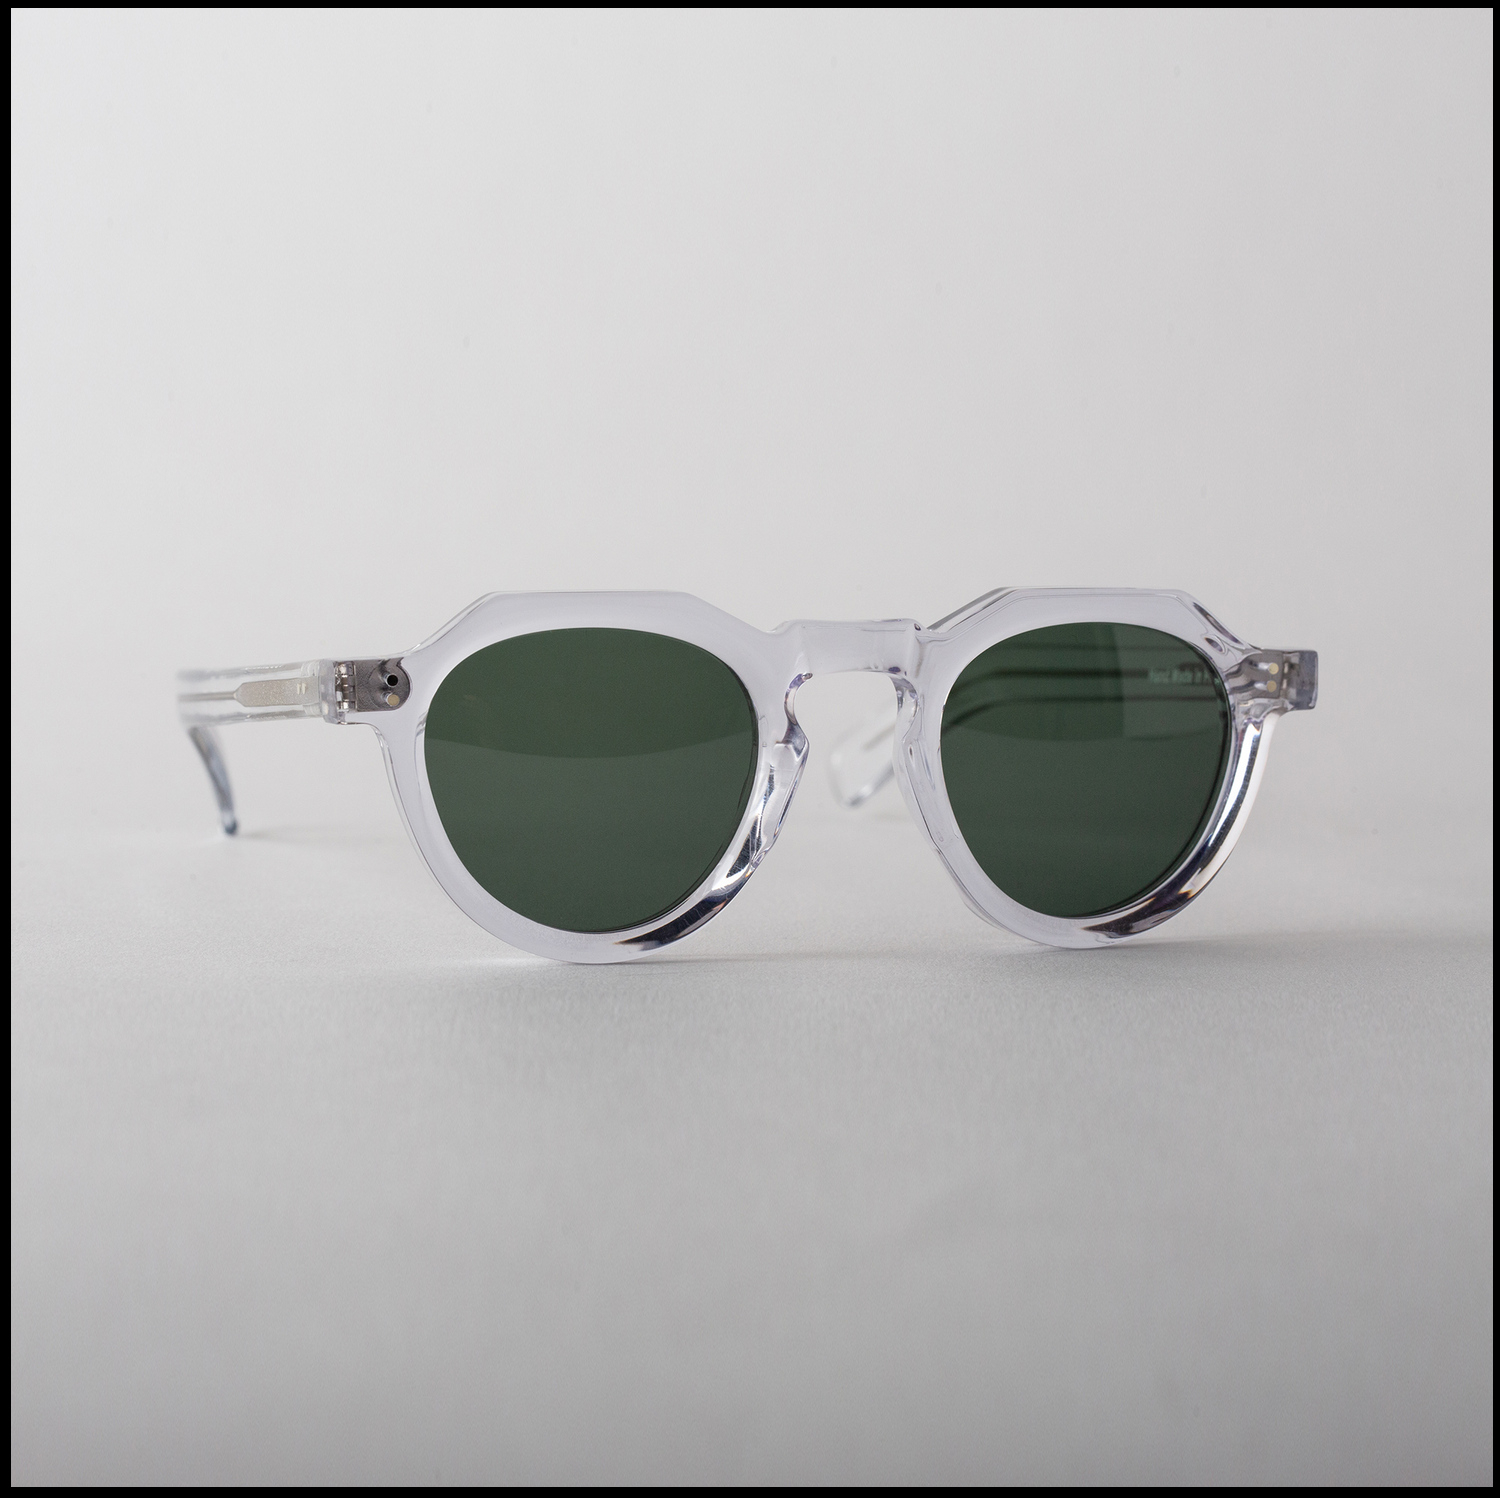 Sunglasses MOD.01 in Crystal color by Arpenteur